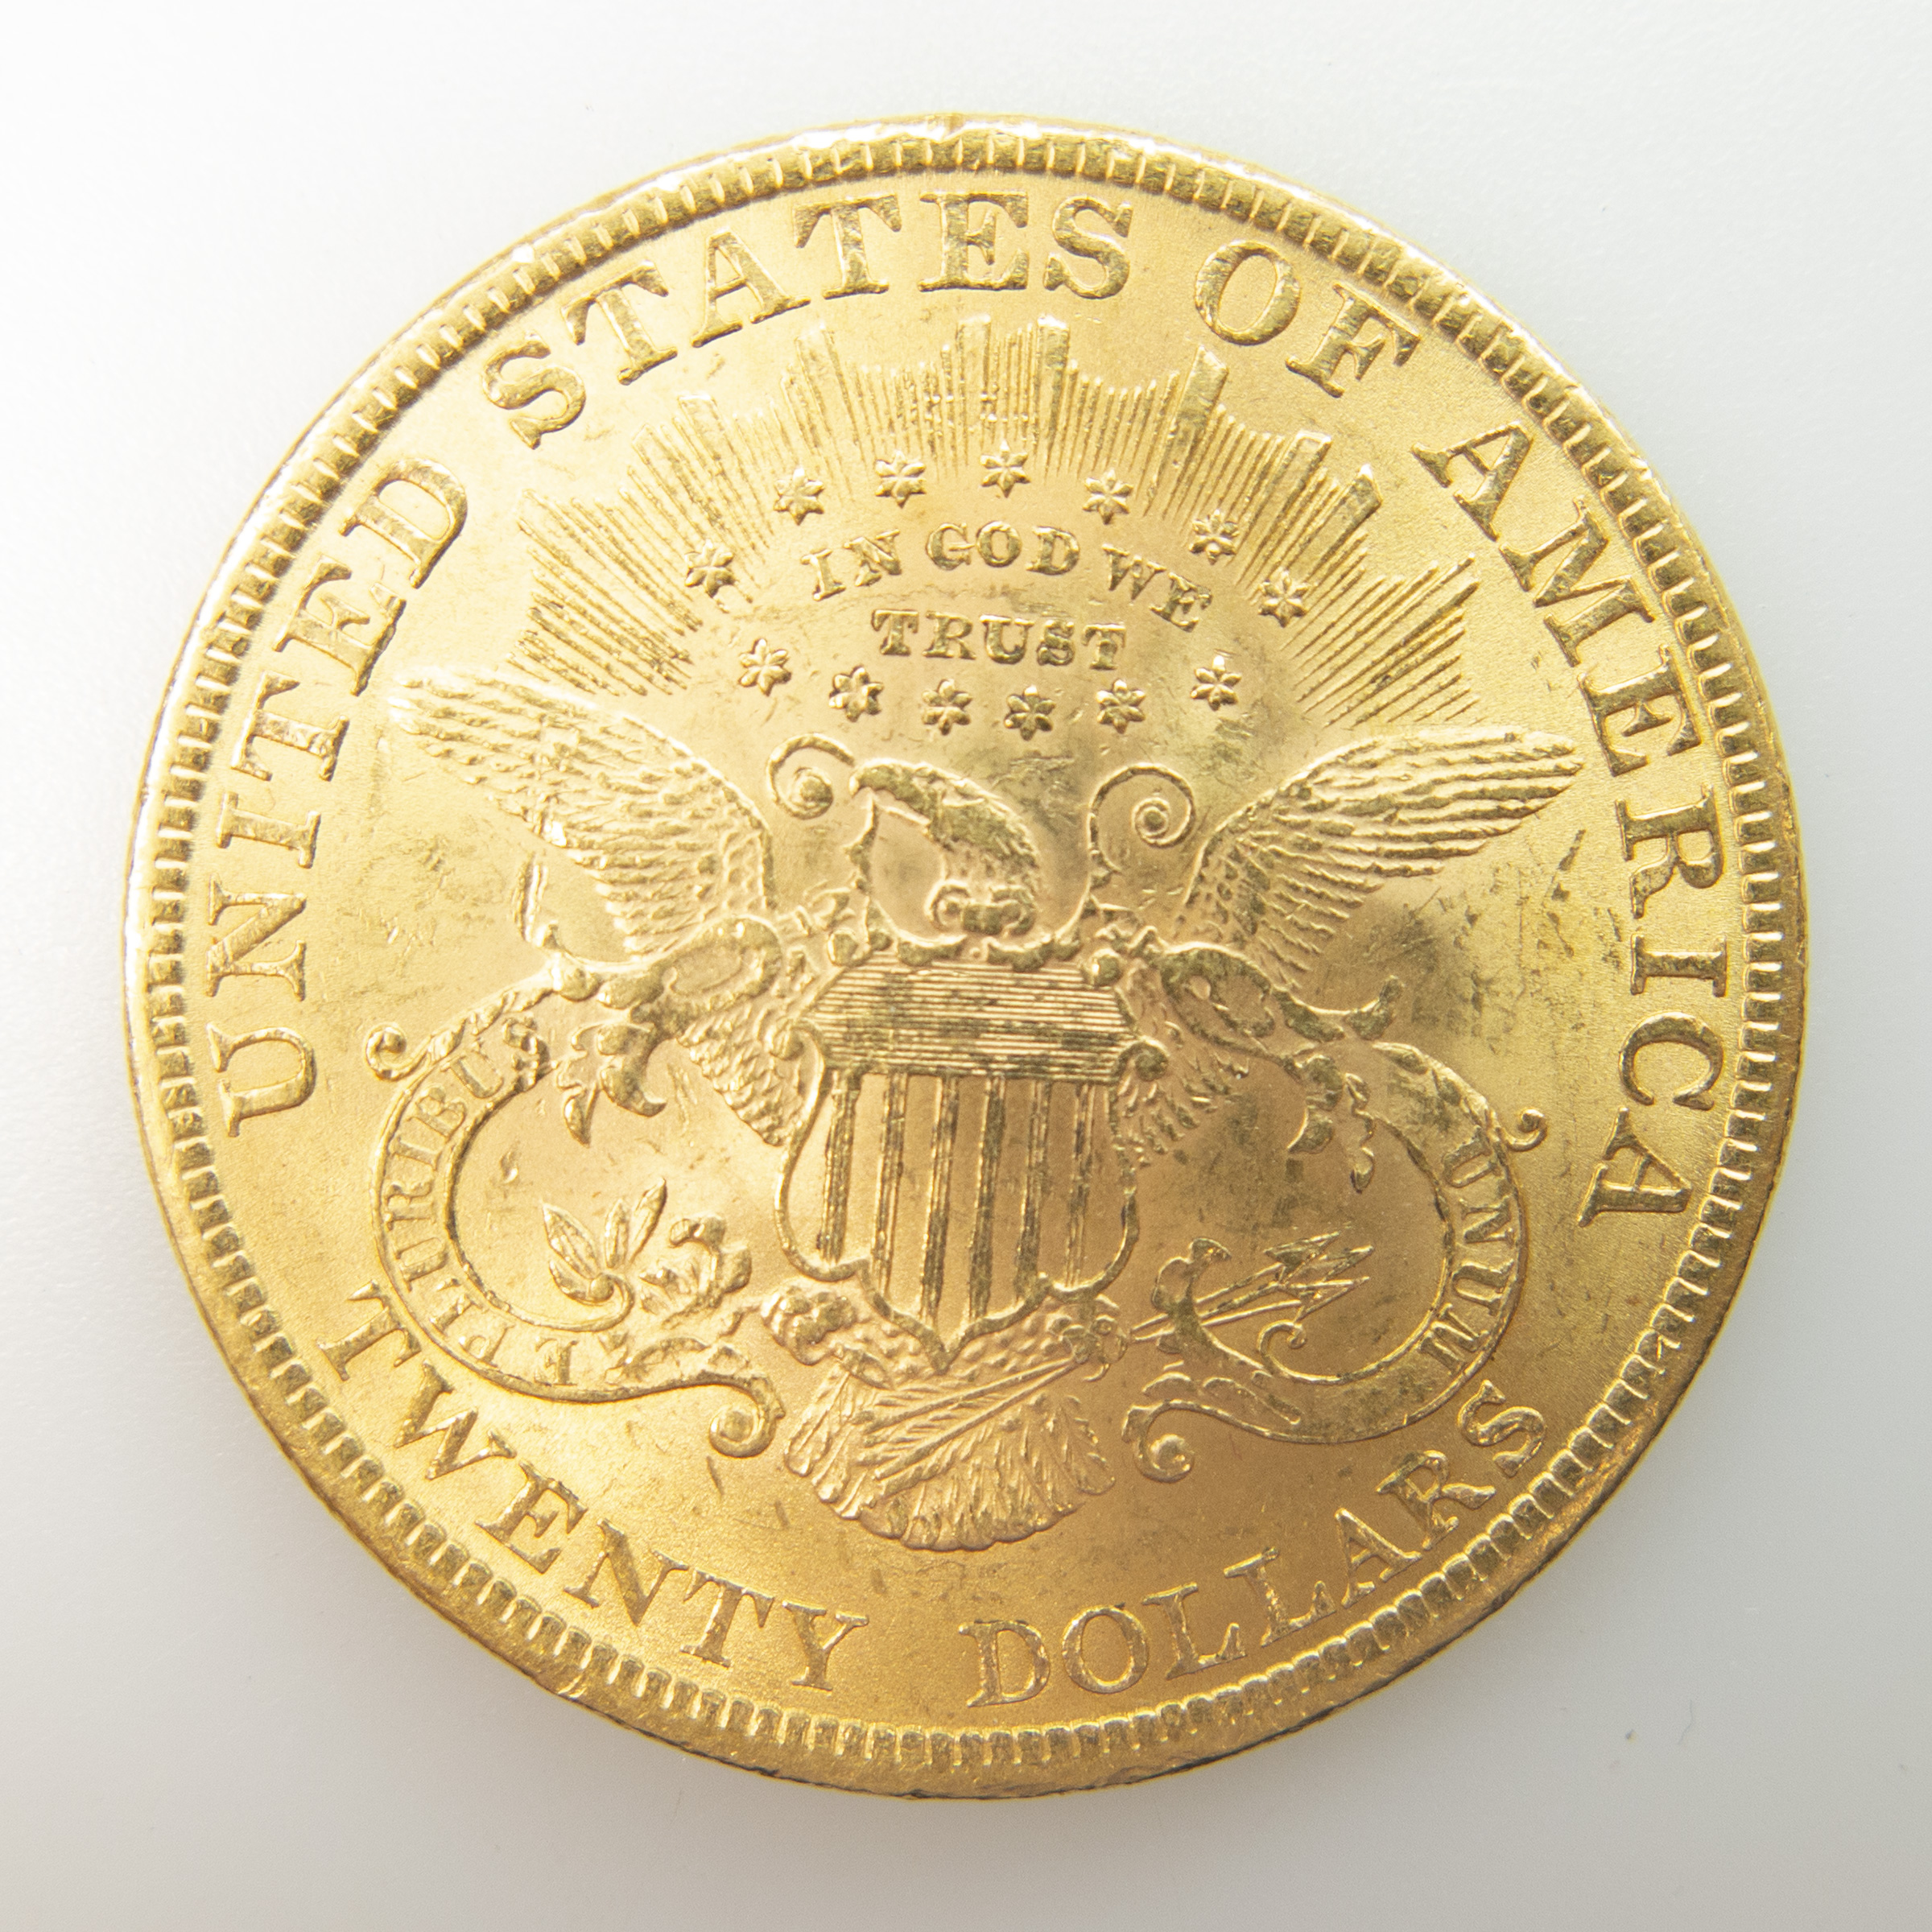 American 1897 $20 Double Eagle Gold Coin